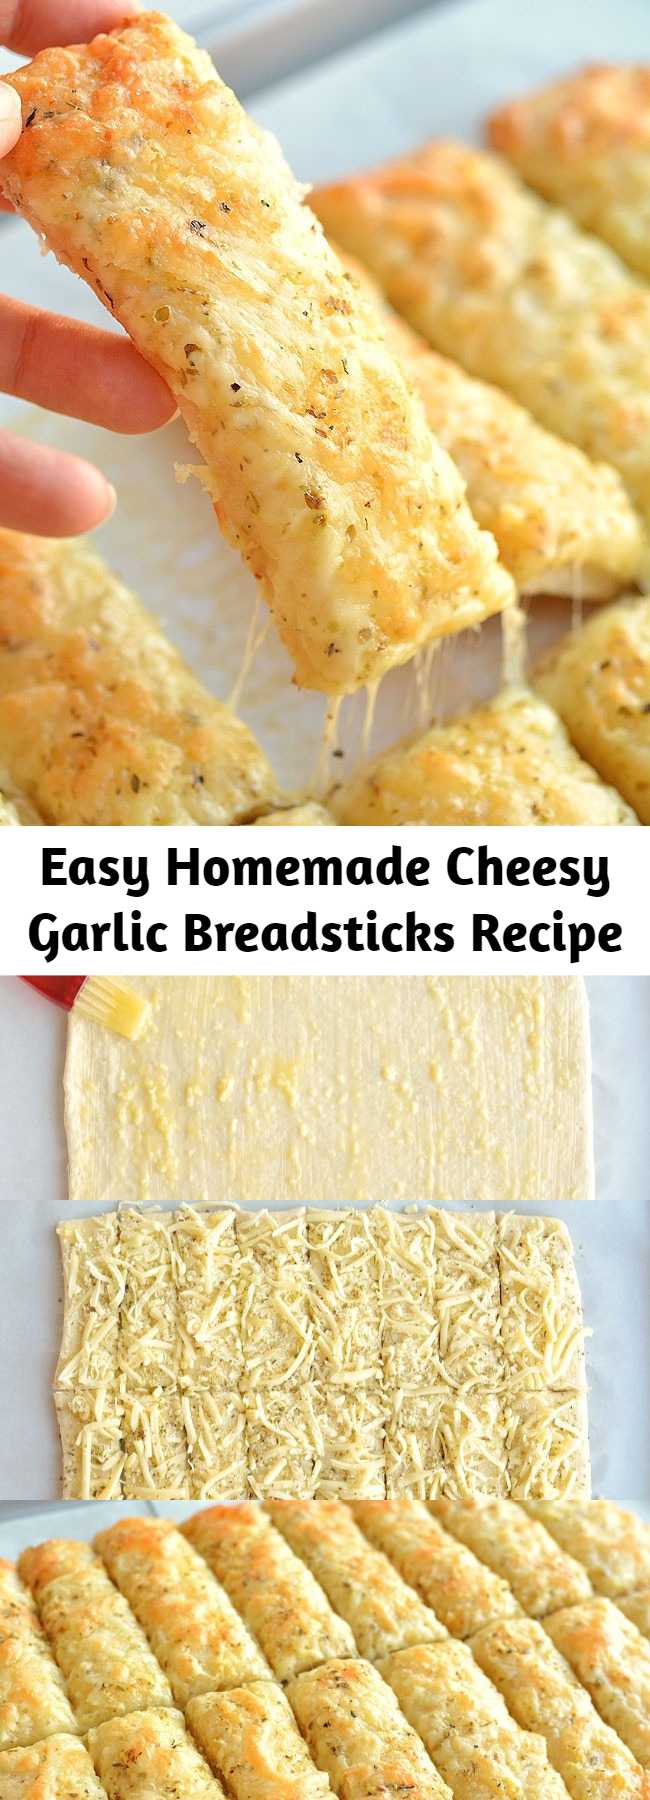 Easy Homemade Cheesy Garlic Breadsticks Recipe - These cheesy garlic breadsticks are so easy to make and they taste SO GOOD! They take less than 20 minutes from start to finish and go really well with your favorite soups and salads. You can even serve them on their own with a little bowl of marinara sauce. This is such an easy, awesome and super delicious side dish recipe that uses Pillsbury refrigerated pizza crust.